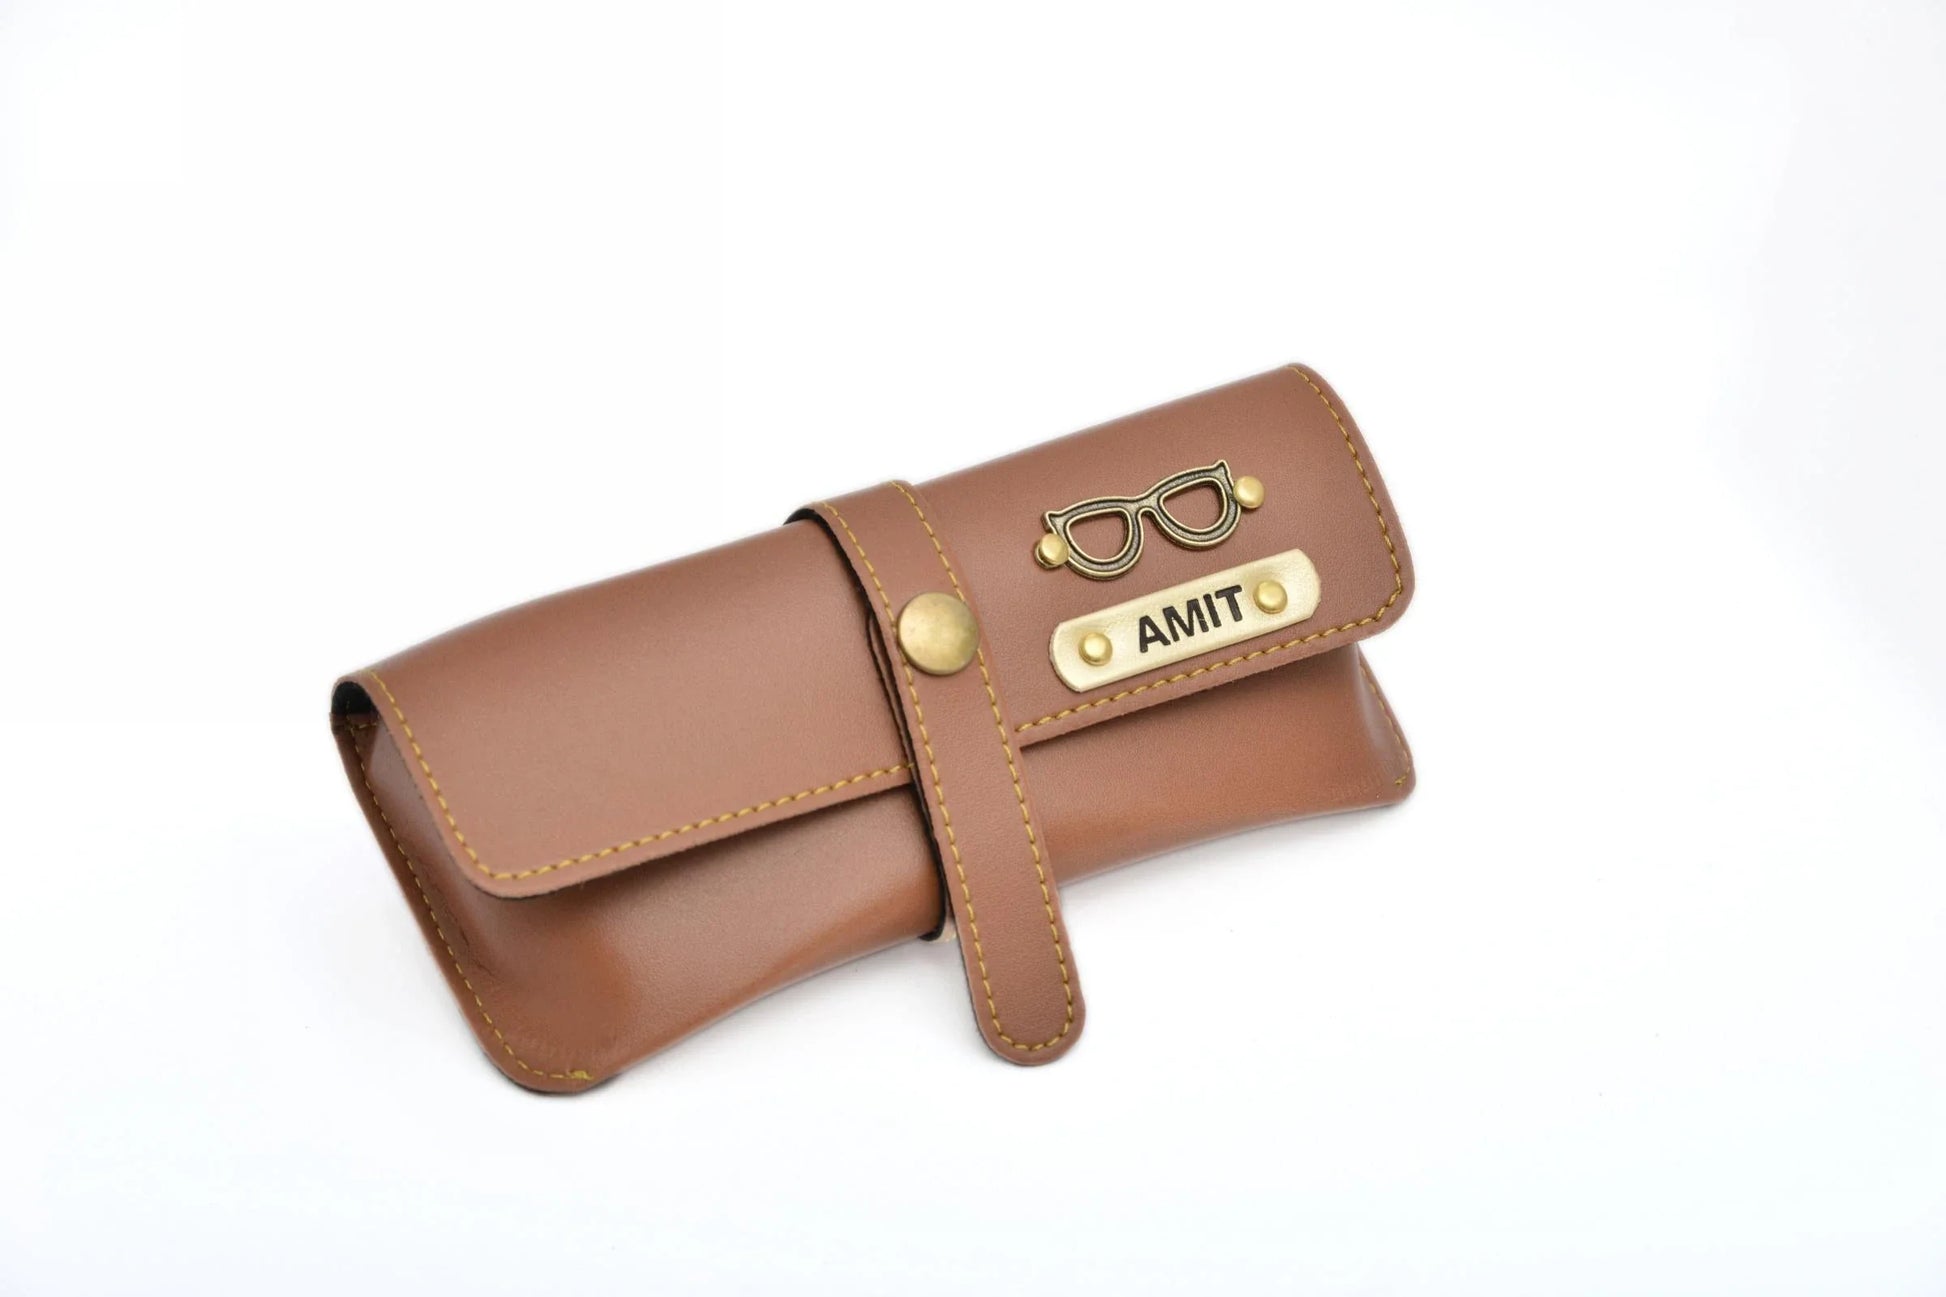 personalized-cb03-tan-customized-best-gift-for-boyfriend-girlfriend.So, protect your eyewear too and make it look modern by getting your very own classy, personalized unisex leather glass case.  Add your name and charm to your favourite coloured eyewear case and live in style!   With a royal leathery finish and a top-notch material quality, these personalized unisex glass cases prove to be sturdy while looking stylish. They protect your eyewear from all sorts of stresses!